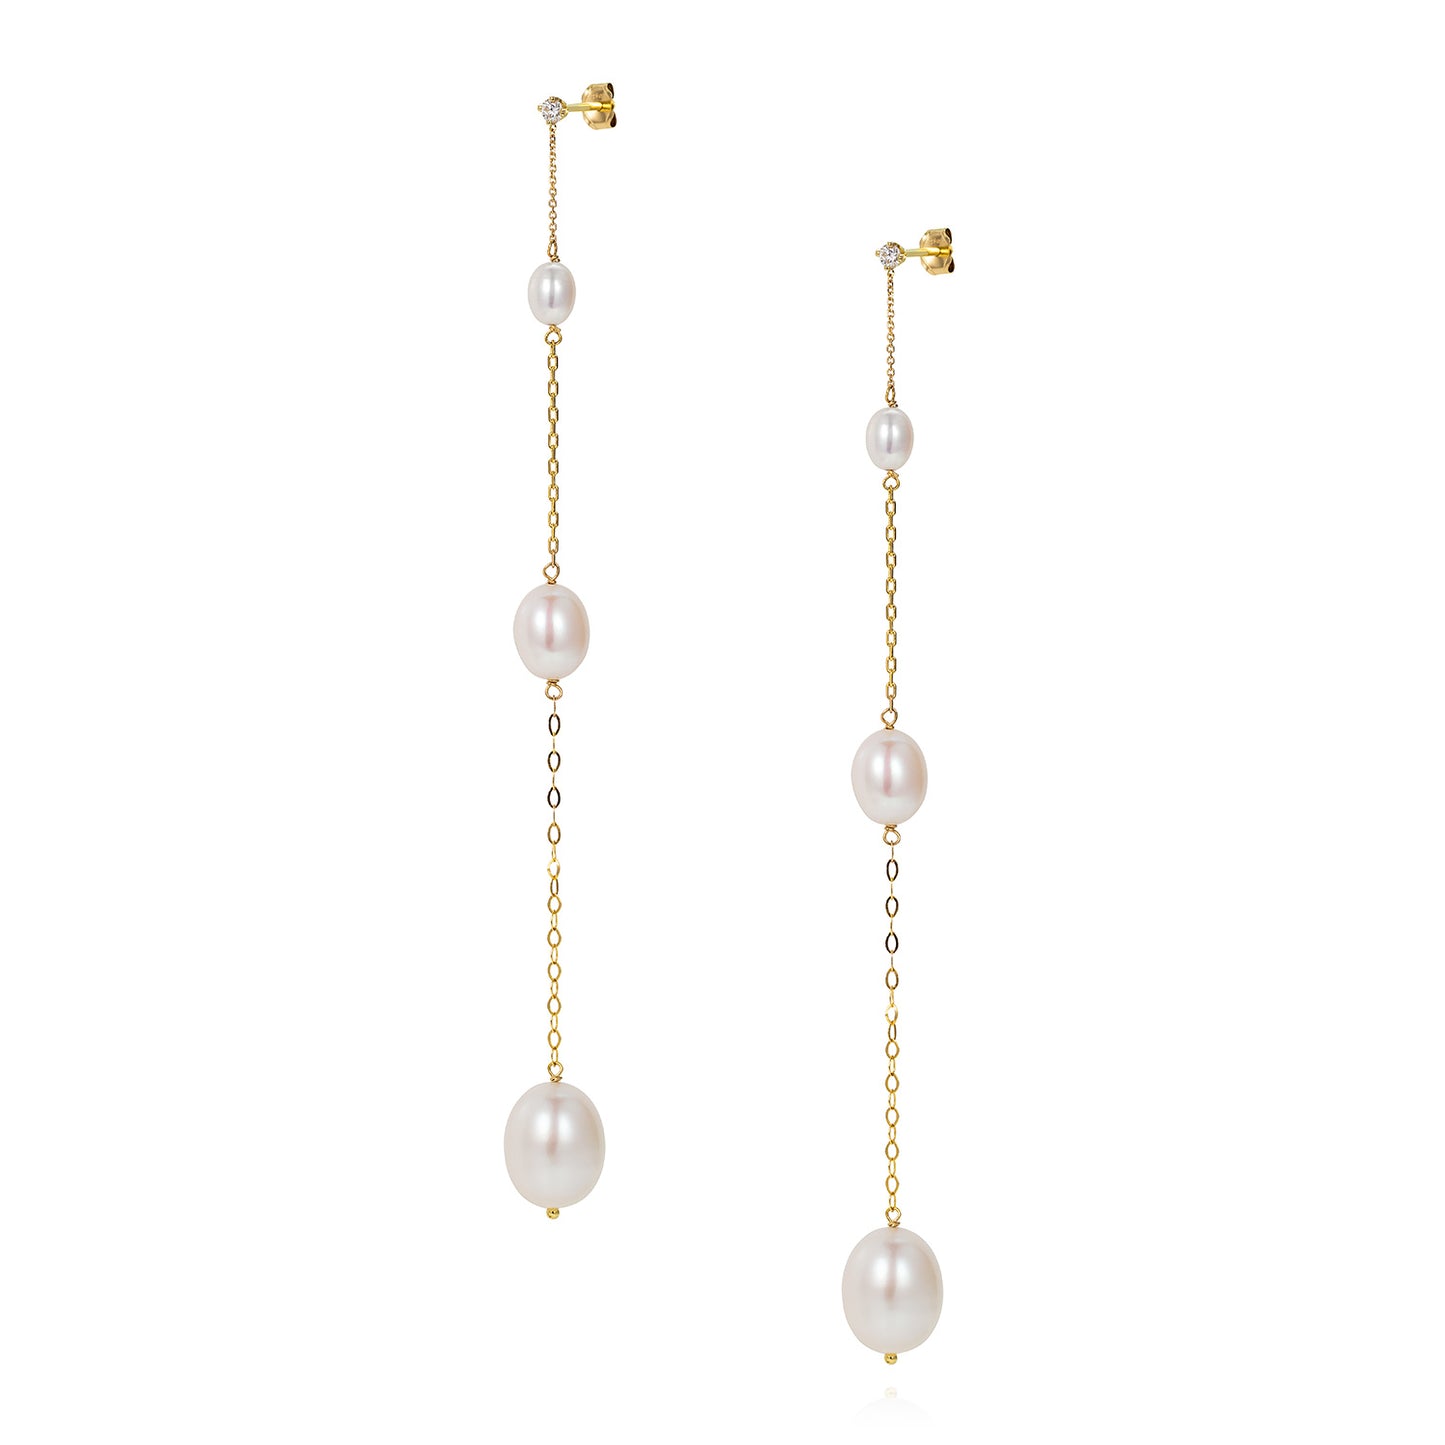 18ct yellow gold white Diamond stud earrings with long fine mixed chain interspersed with white oval shaped fresh water pearls. From our Snowdrop Pearl collection.